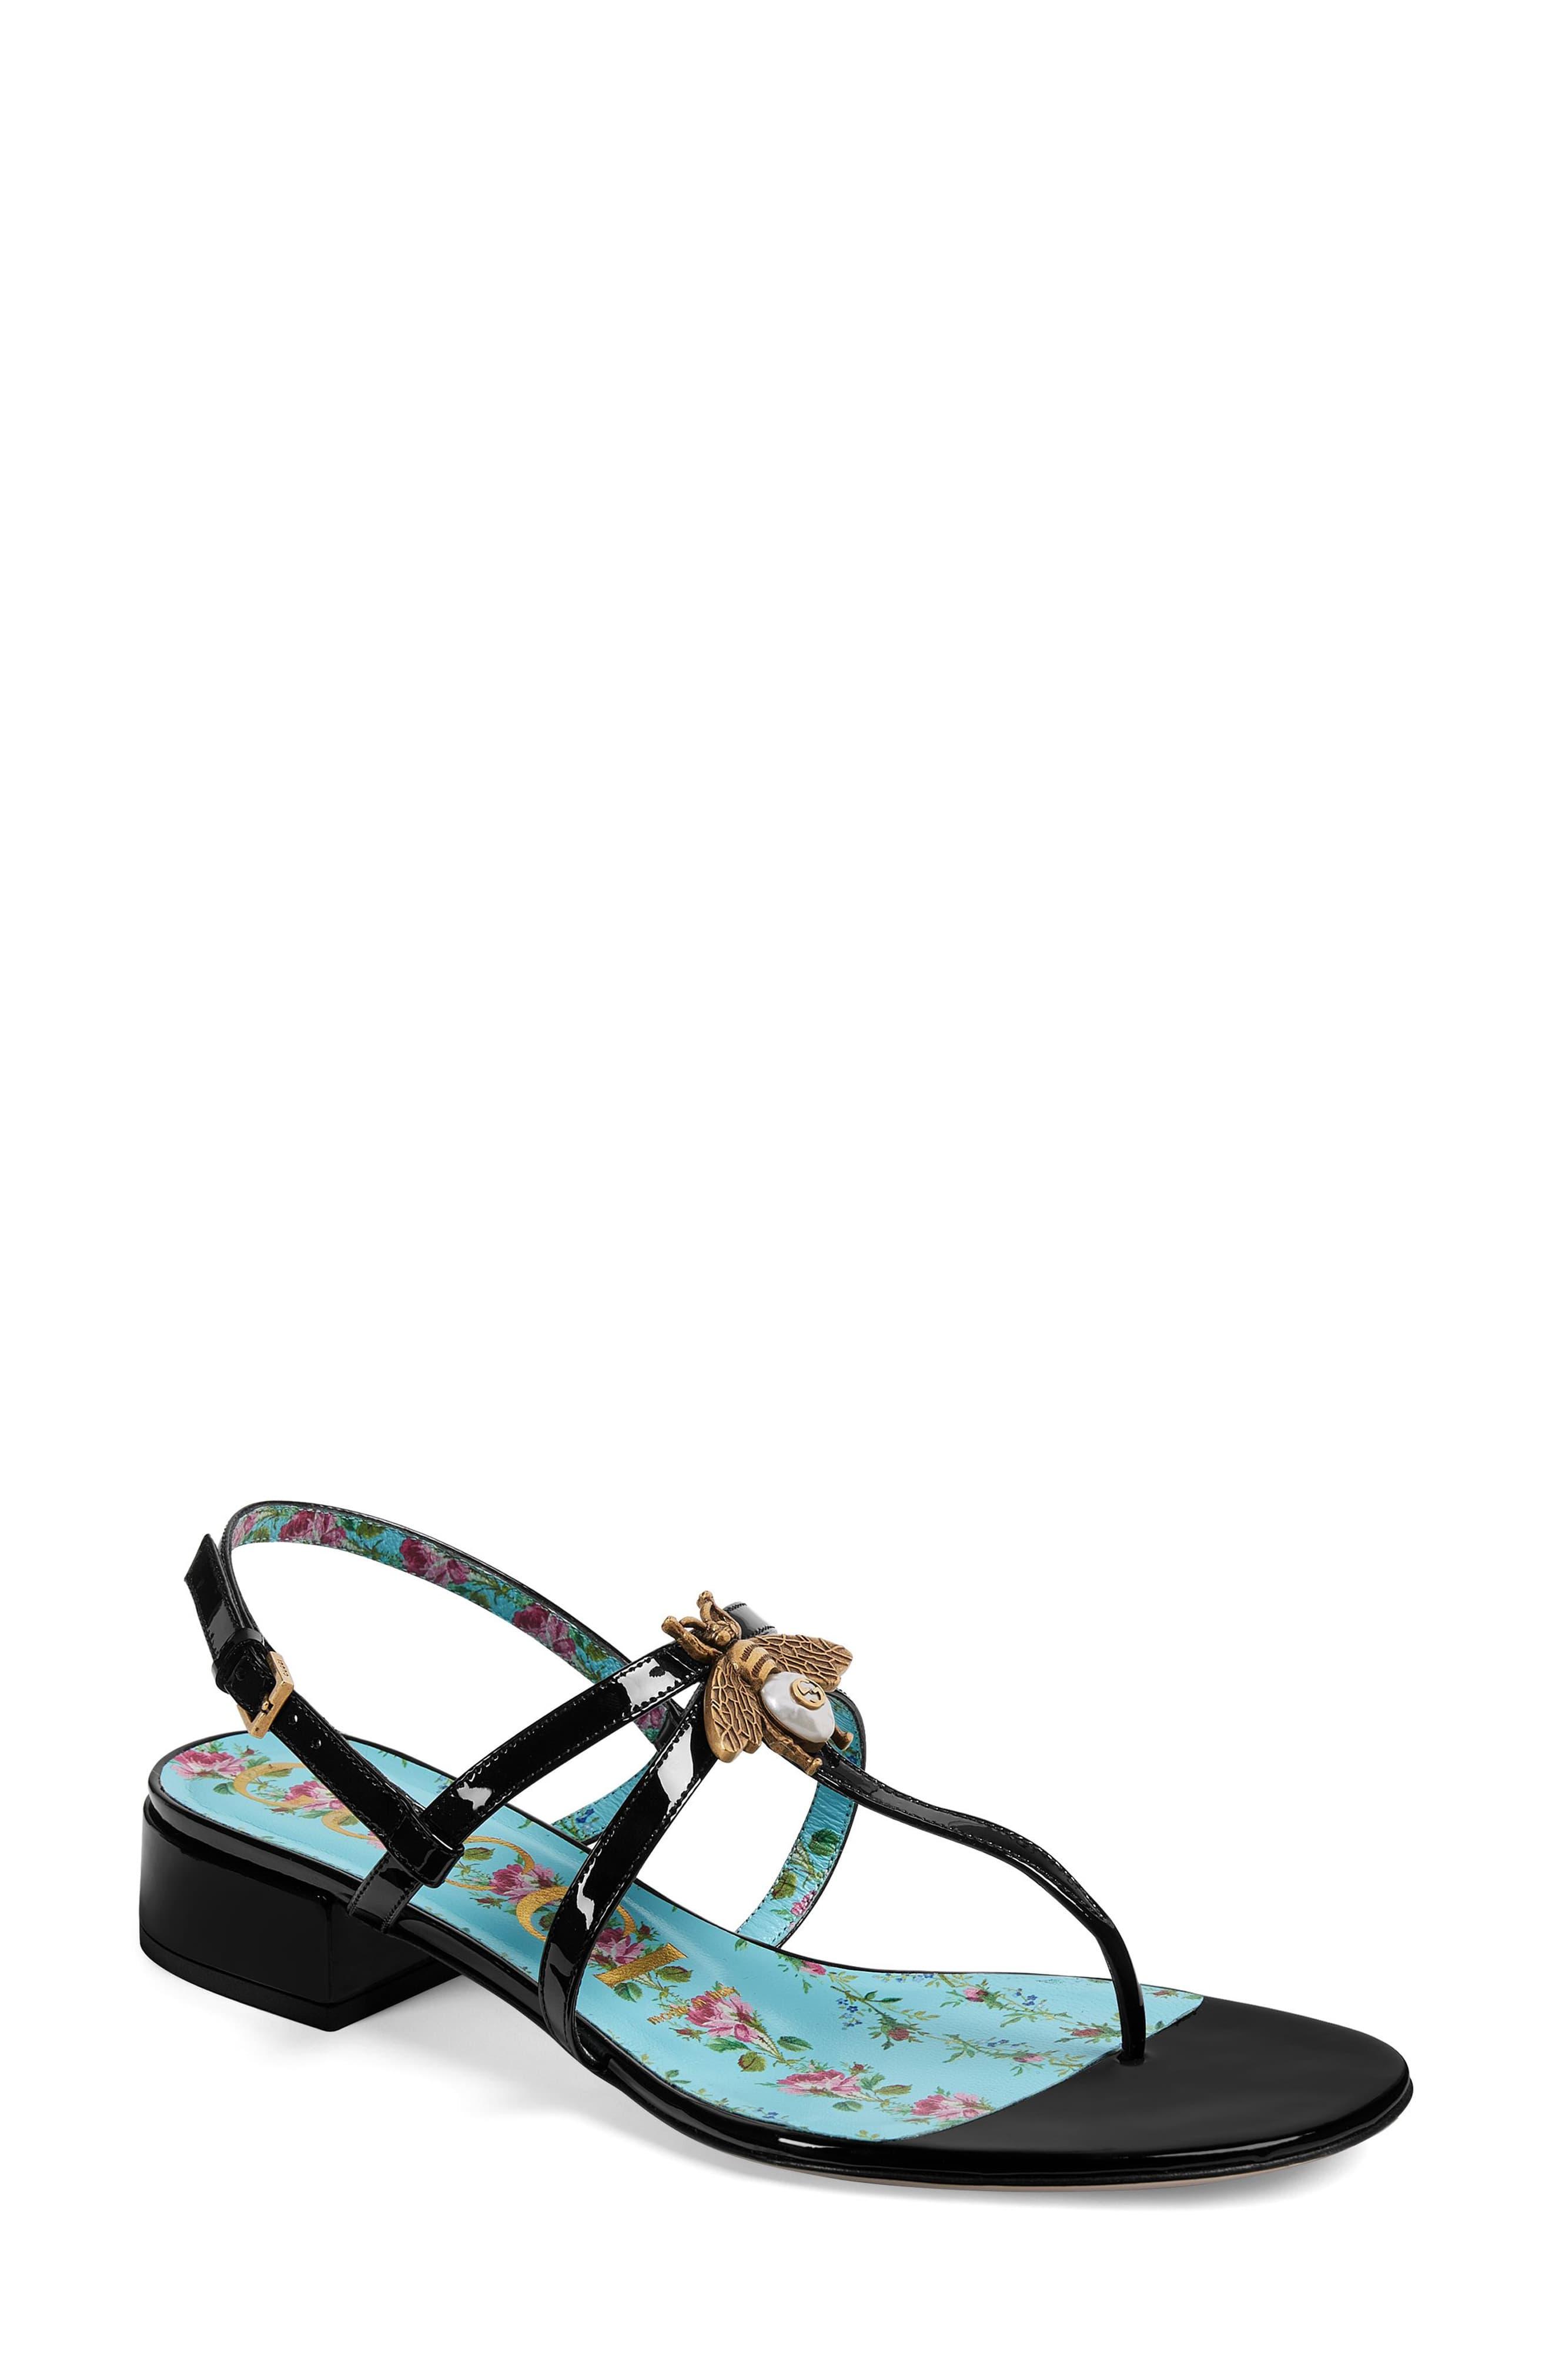 Gucci Bee Thong Sandal in Black - Lyst